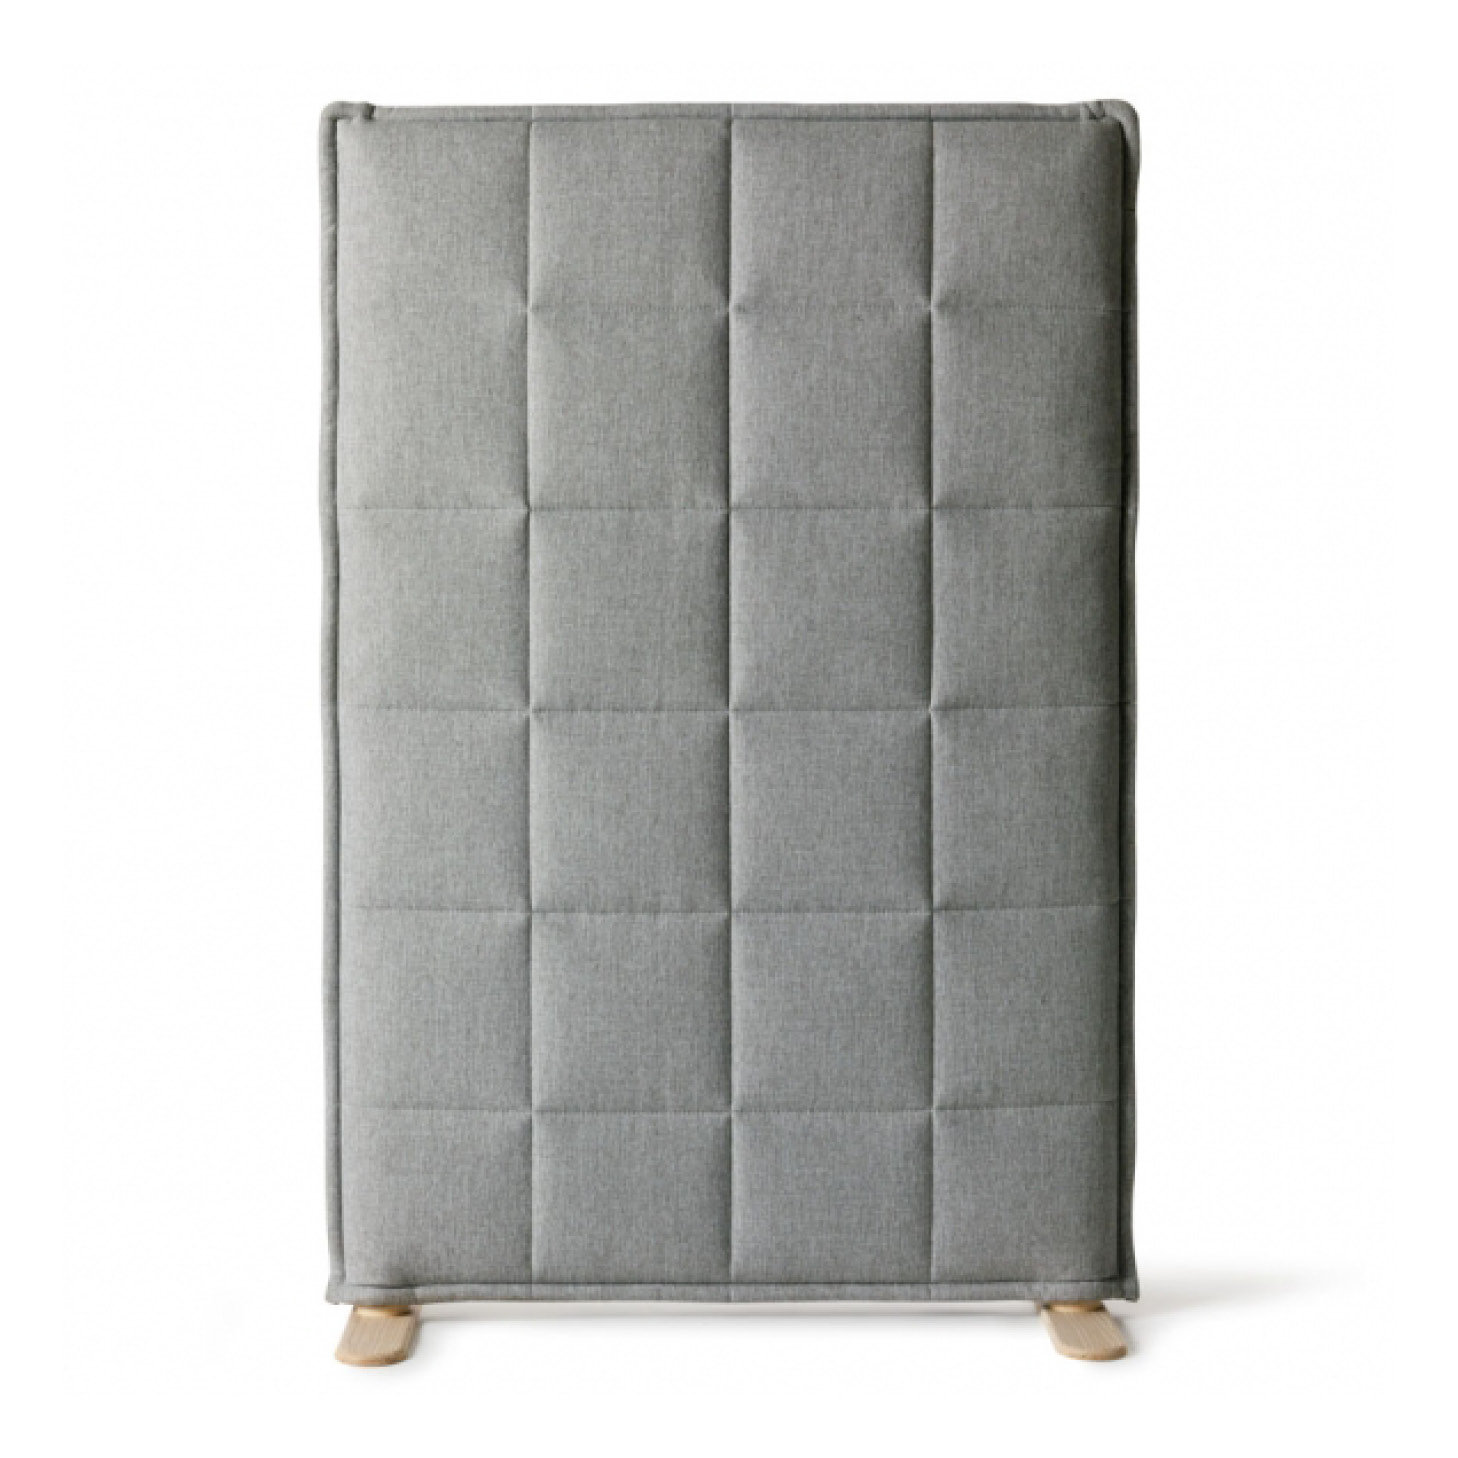 Stitch Screen acoustic floor screen in color grey